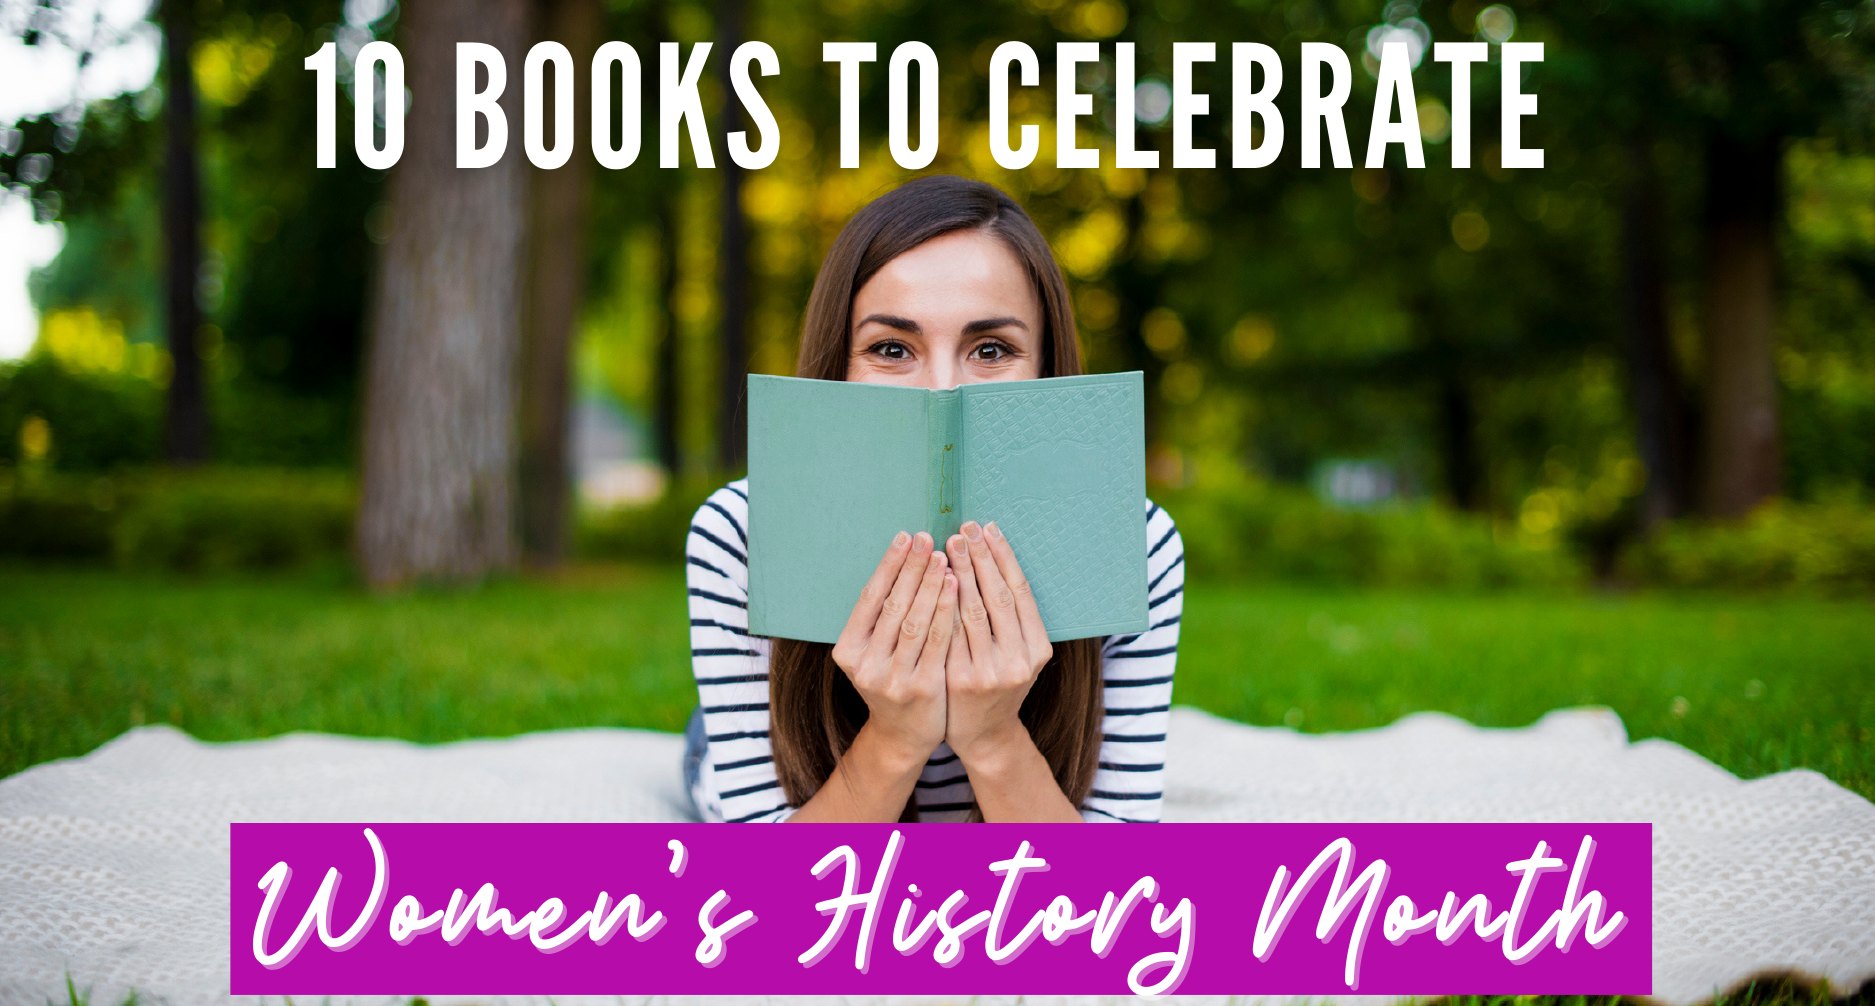 10 Books to Celebrate Women's History Month